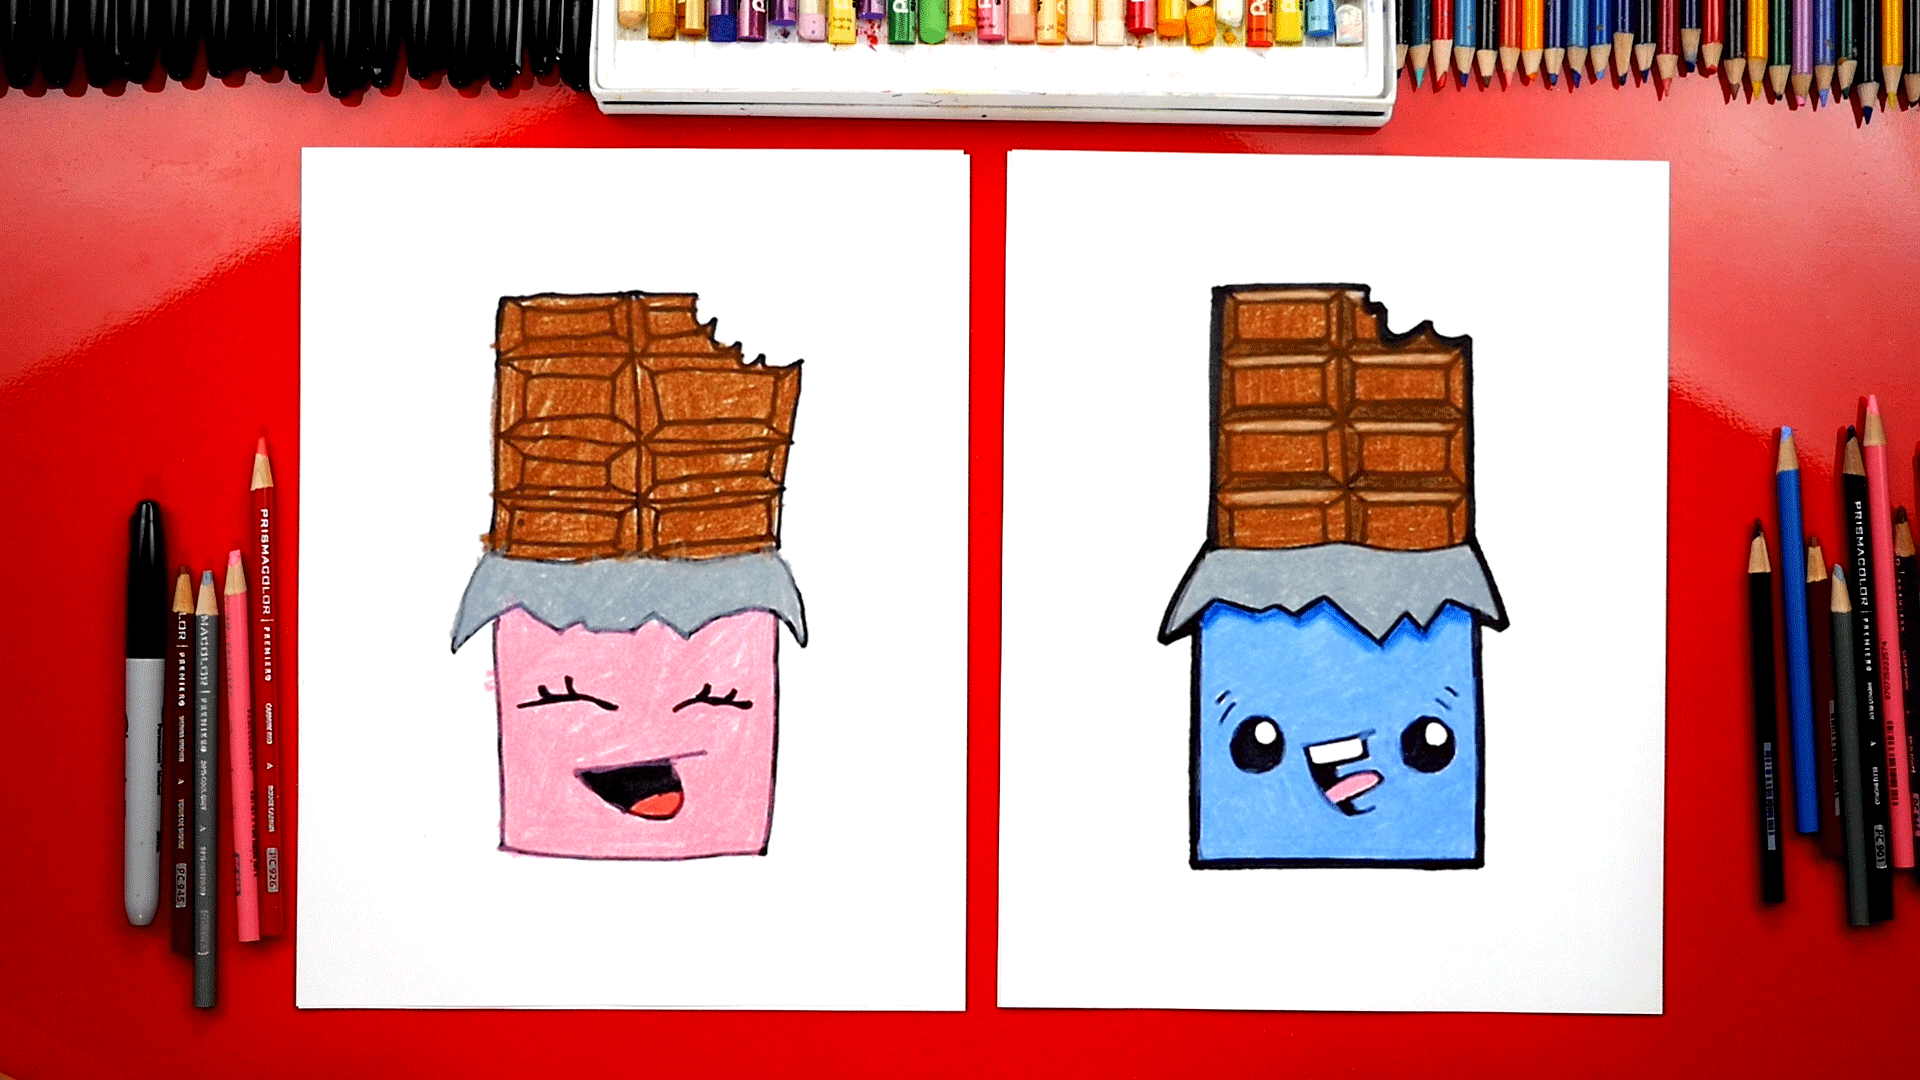 How To Draw A Chocolate Candy Bar - Art For Kids Hub